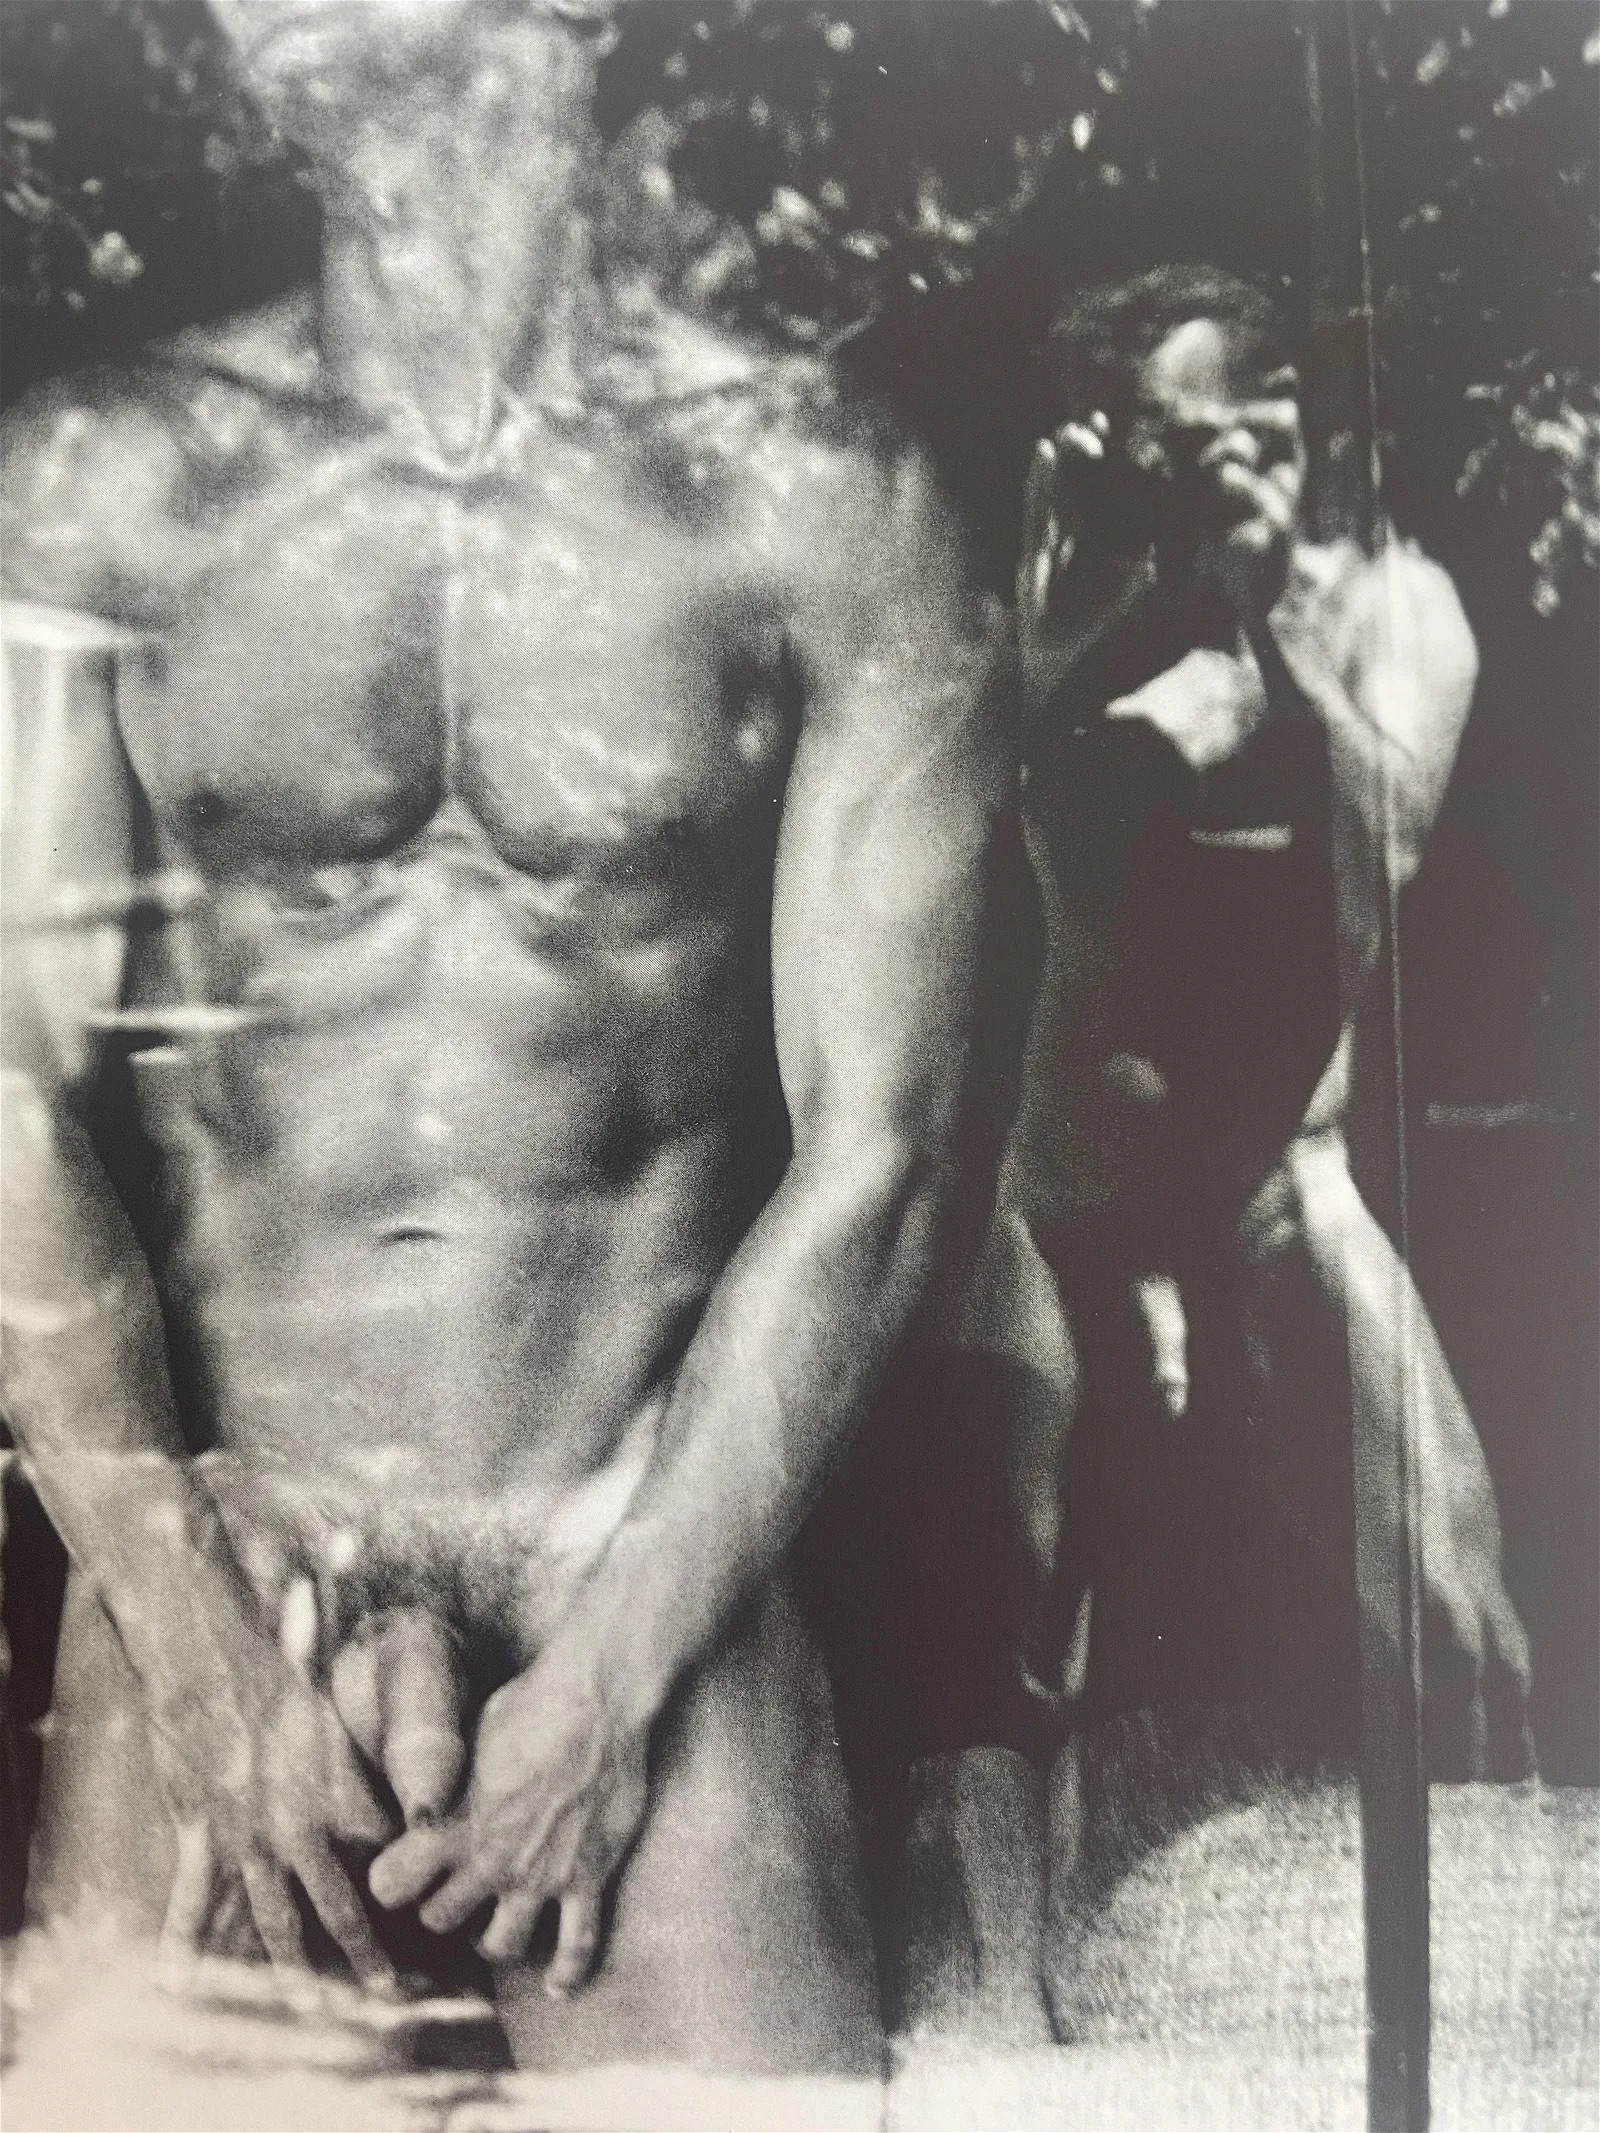 Tom Bianchi "Male Nude" Print - Image 2 of 6